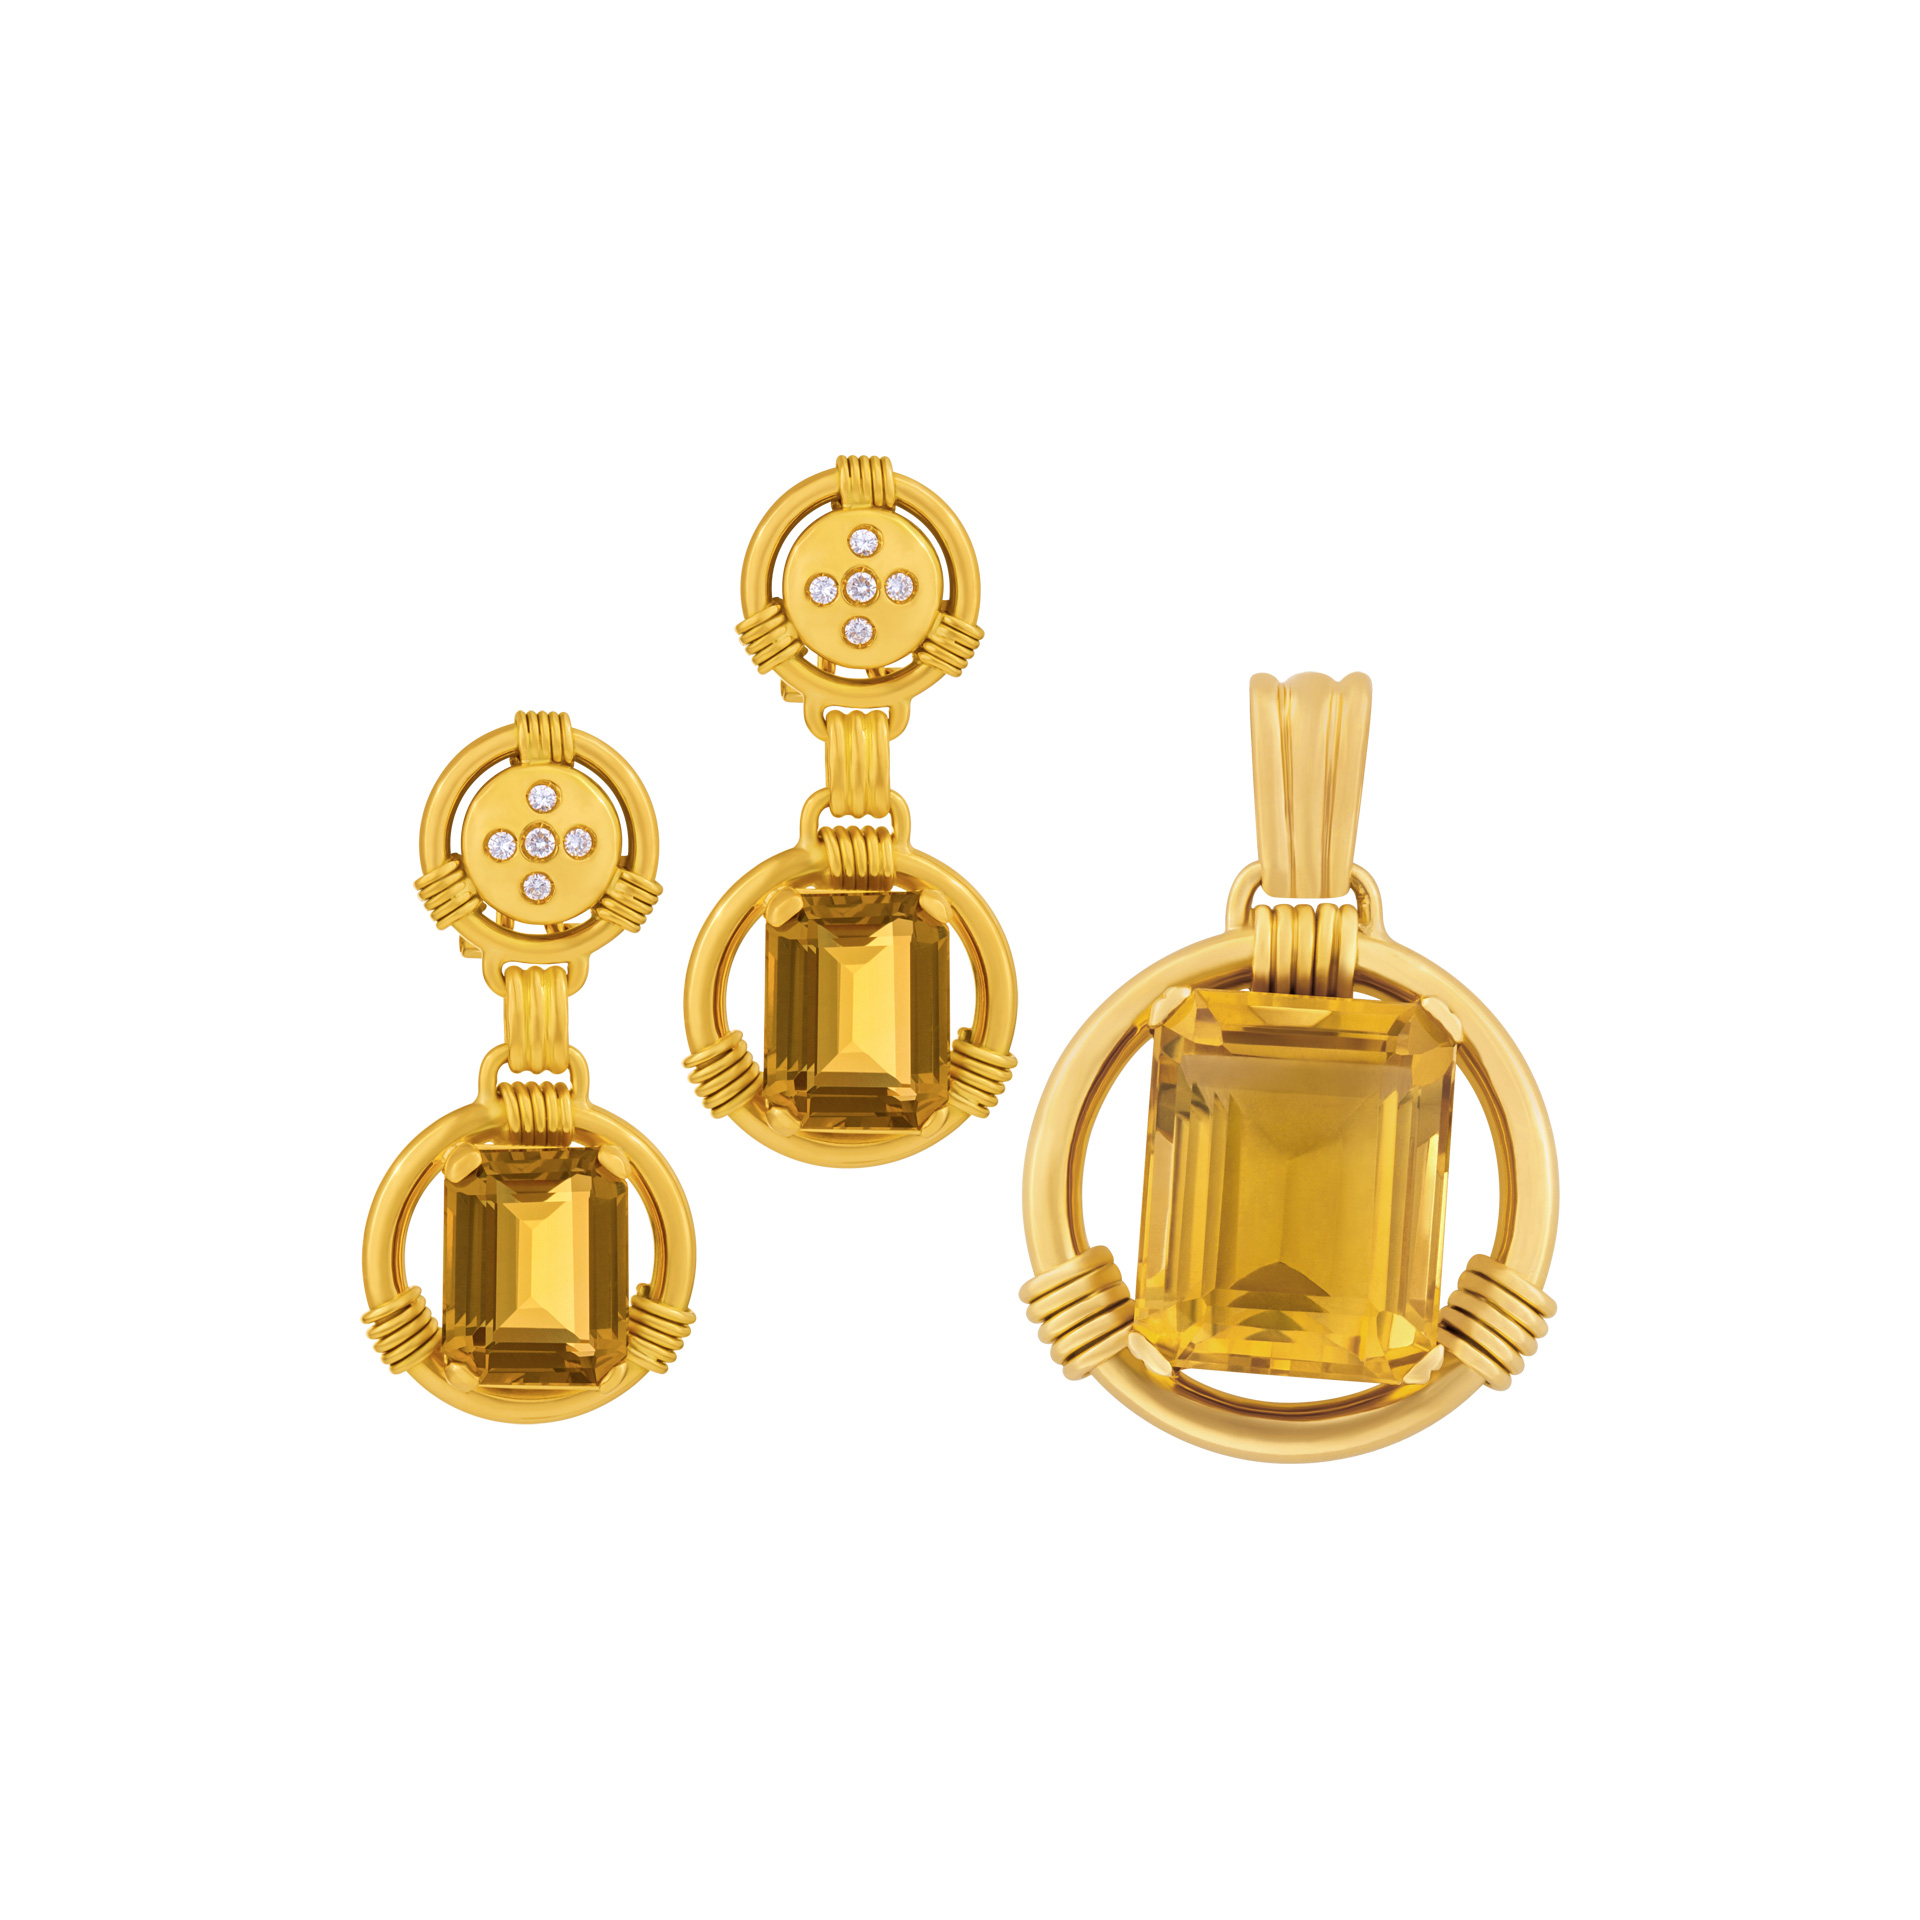 Citrine and diamond earrings and pendant set in 18k image 1